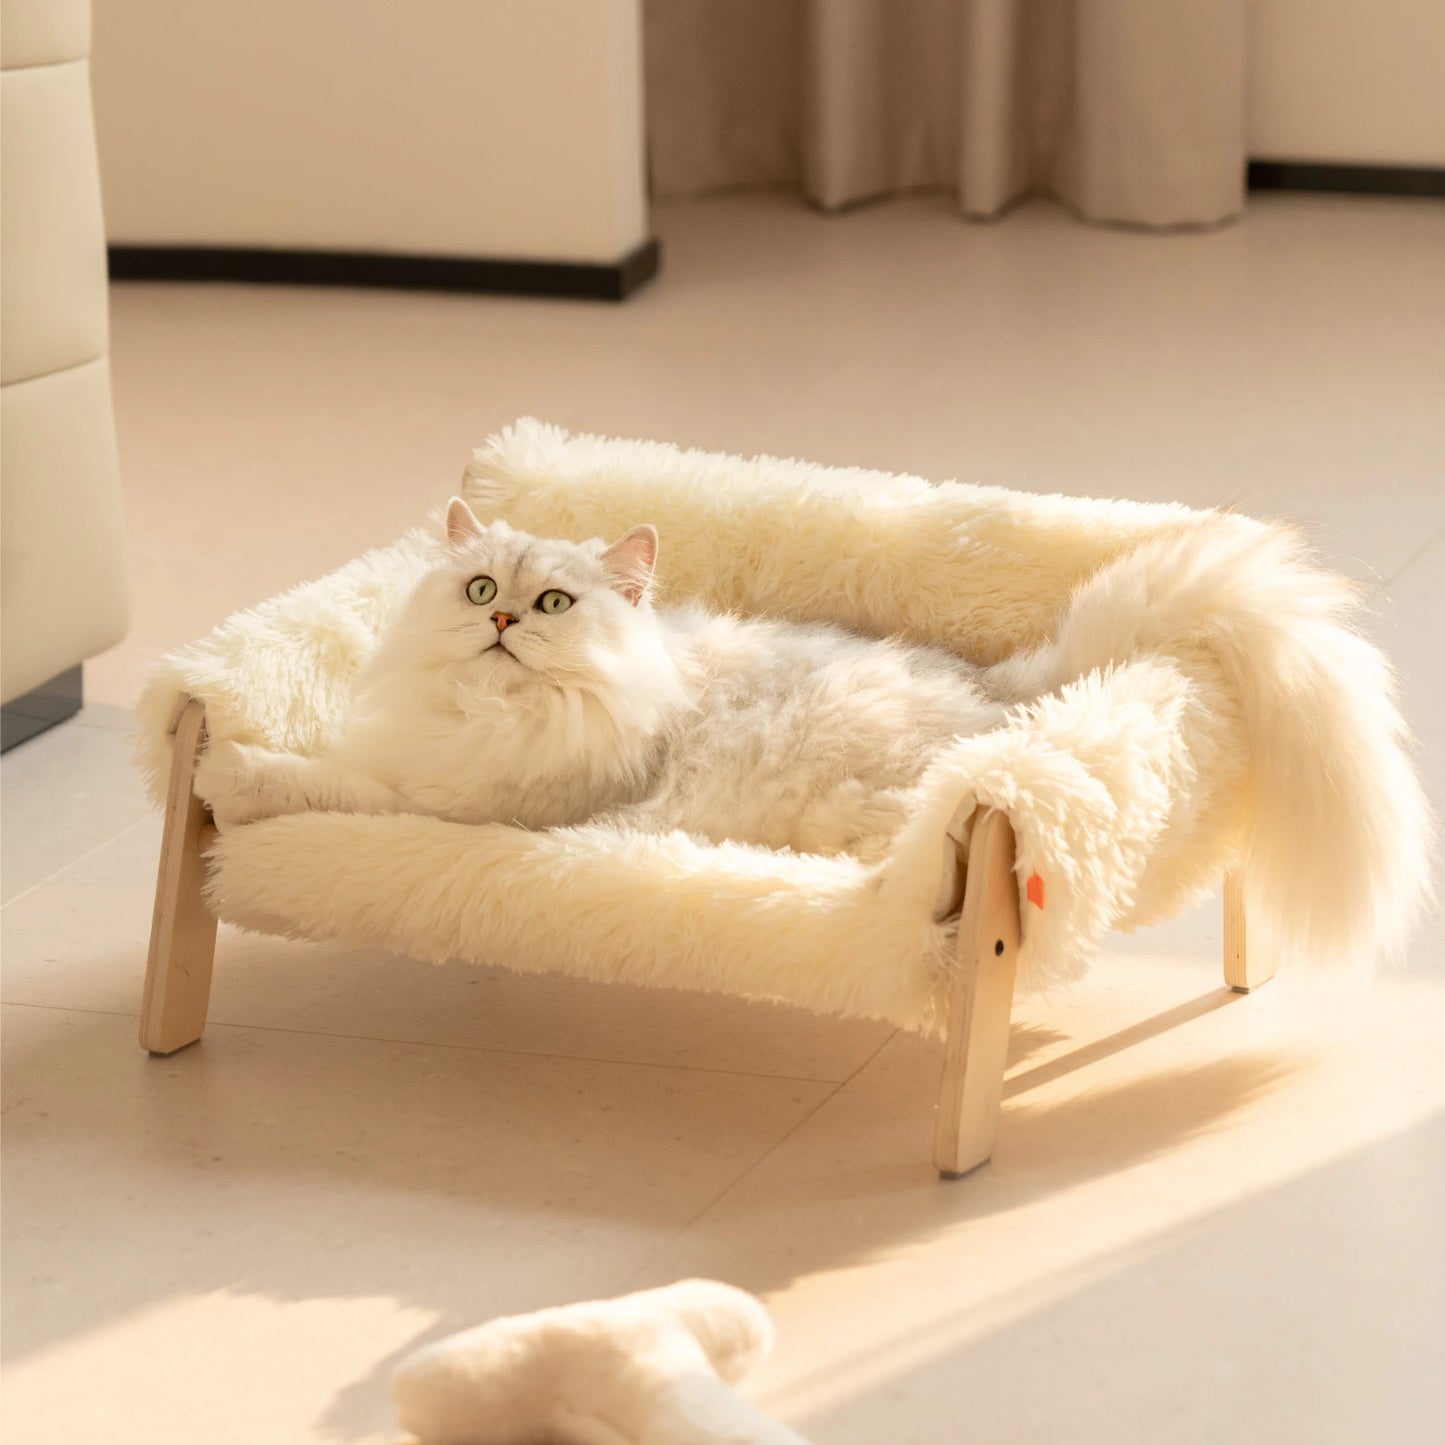 Mewoofun Cat Bed SofaWooden, Sturdy Fluffy Cat Couch